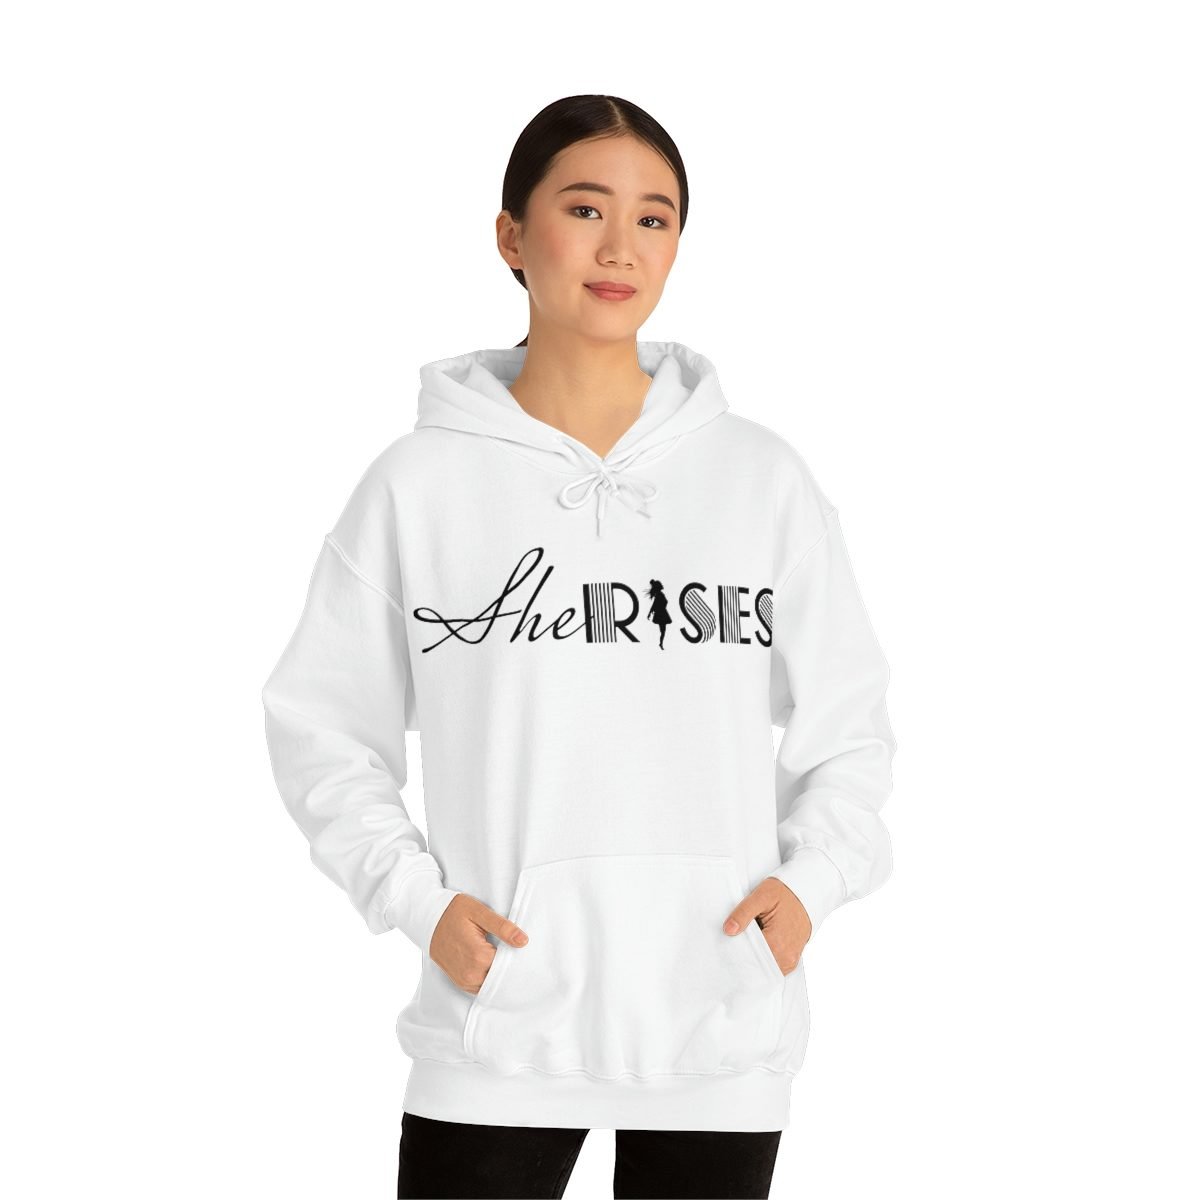 His Place Women’s Ministry – She Rises Pullover Hooded Sweatshirt